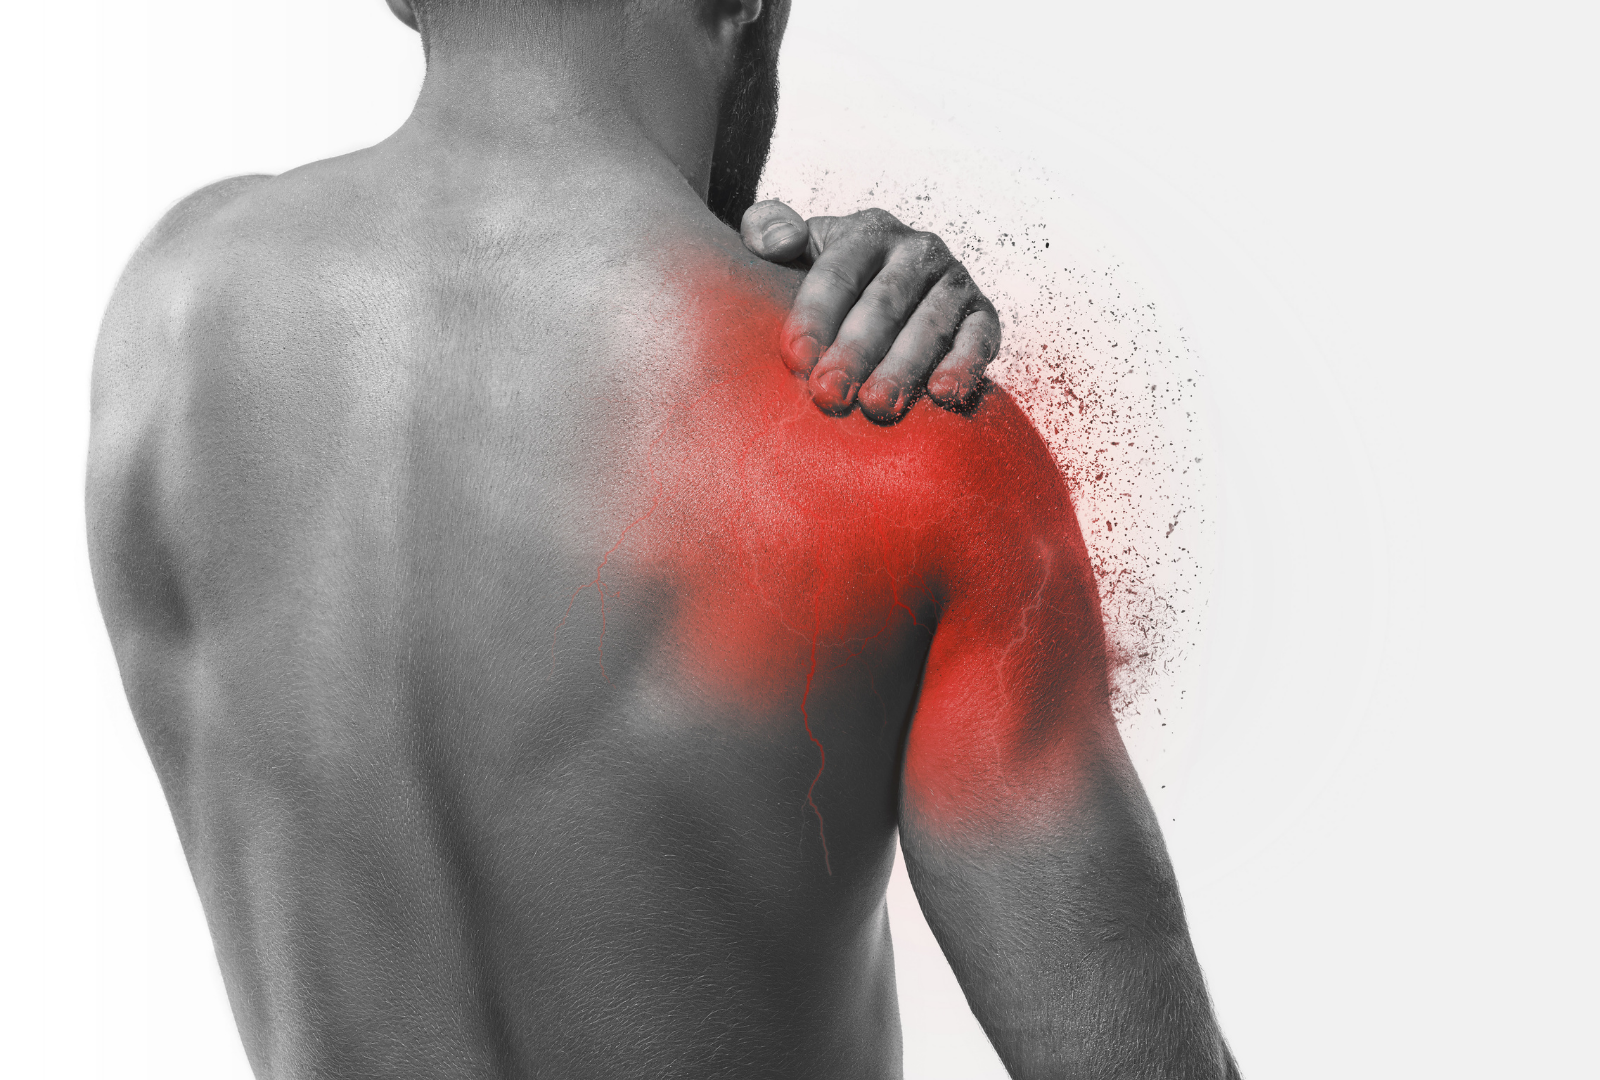 Pinched Nerve in Shoulder – Causes and Treatment